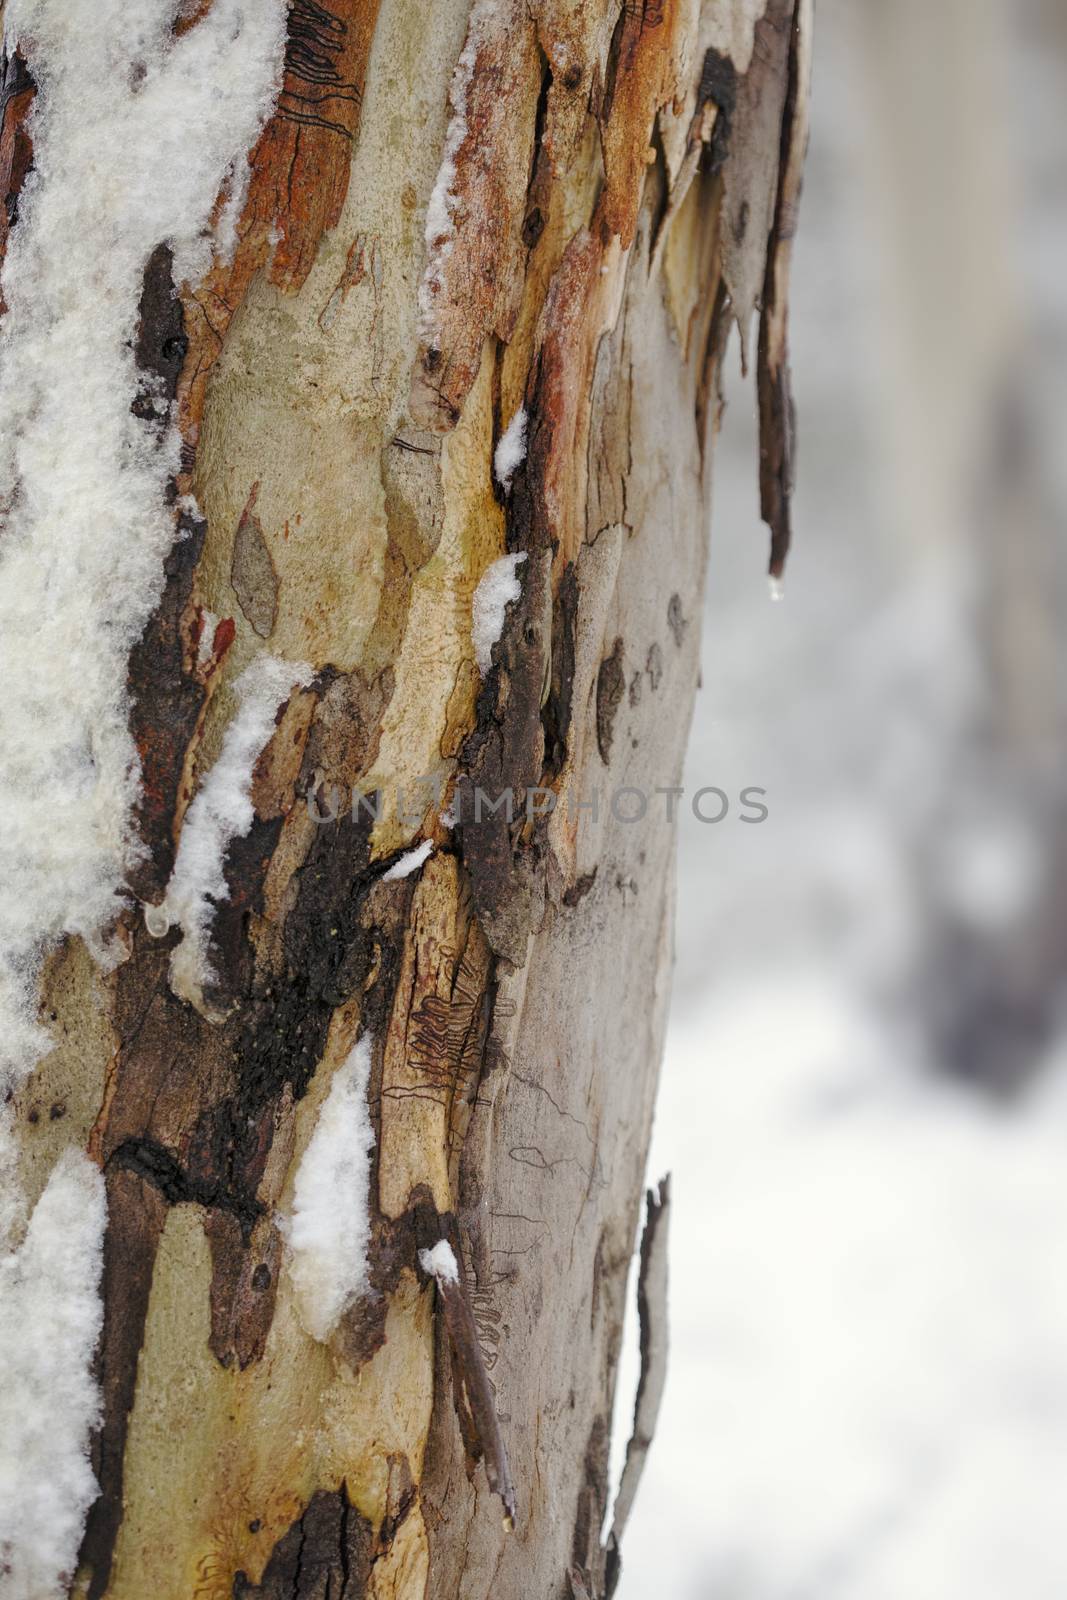 Textures and varying shades of colours, from light grey browns to rustic orange browns, dark chocolate browns and creamy yellows  of gum tree bark that is covered in snow in winter.   Squiggly gum moth trails can be seen in some areas.